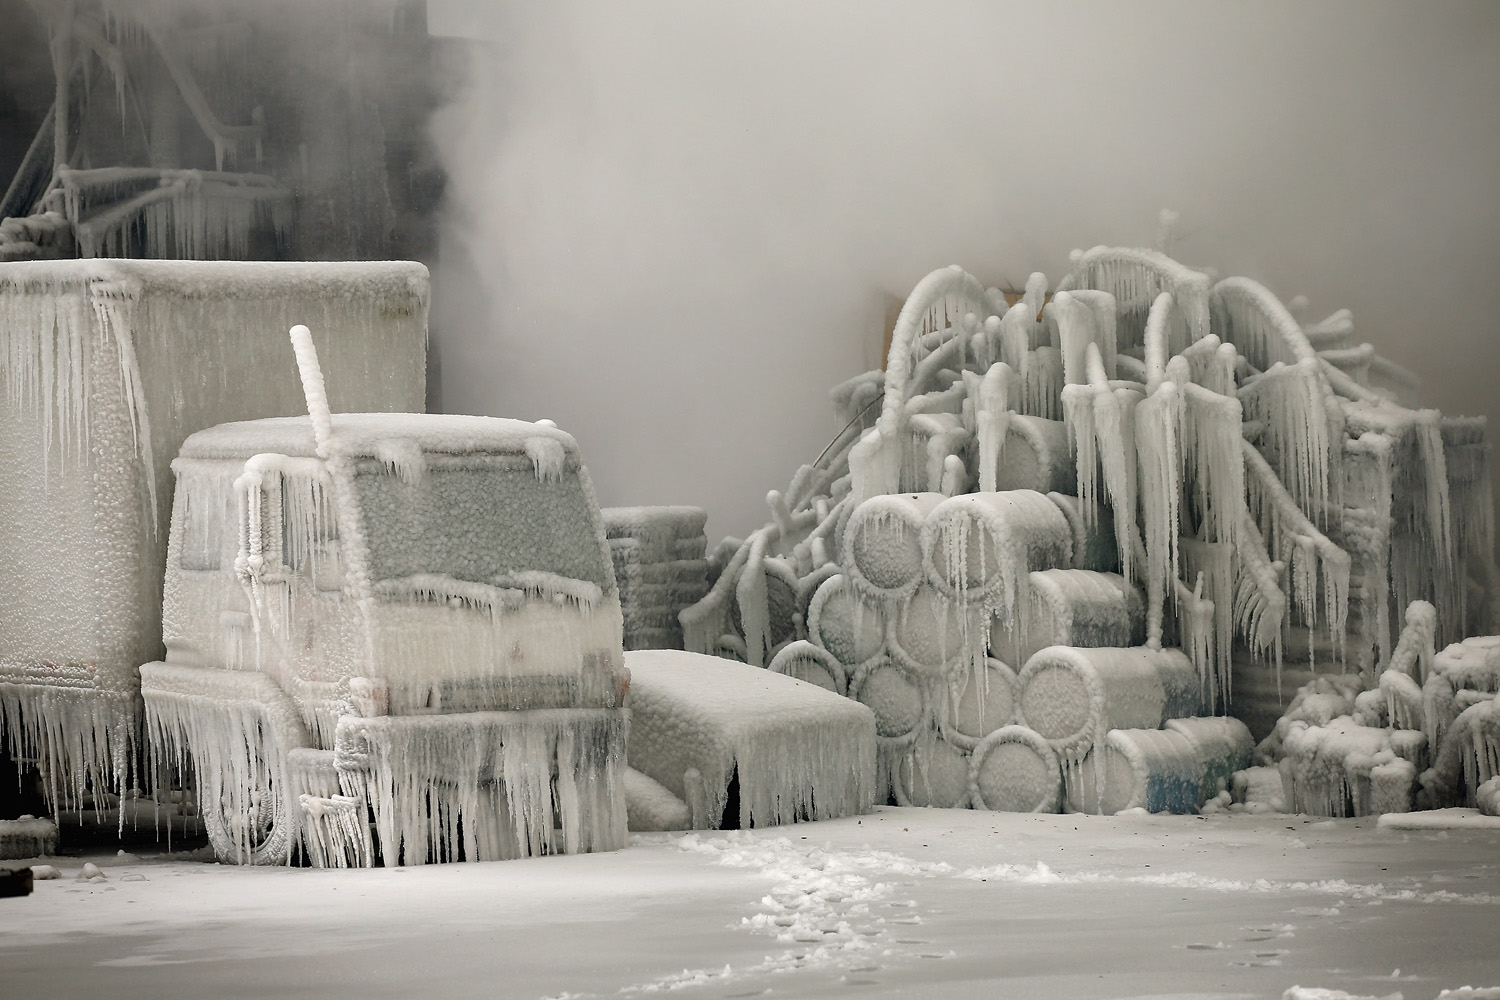 Firefighters Battling Massive Chicago Blaze Hindered By Frigid Temperatures